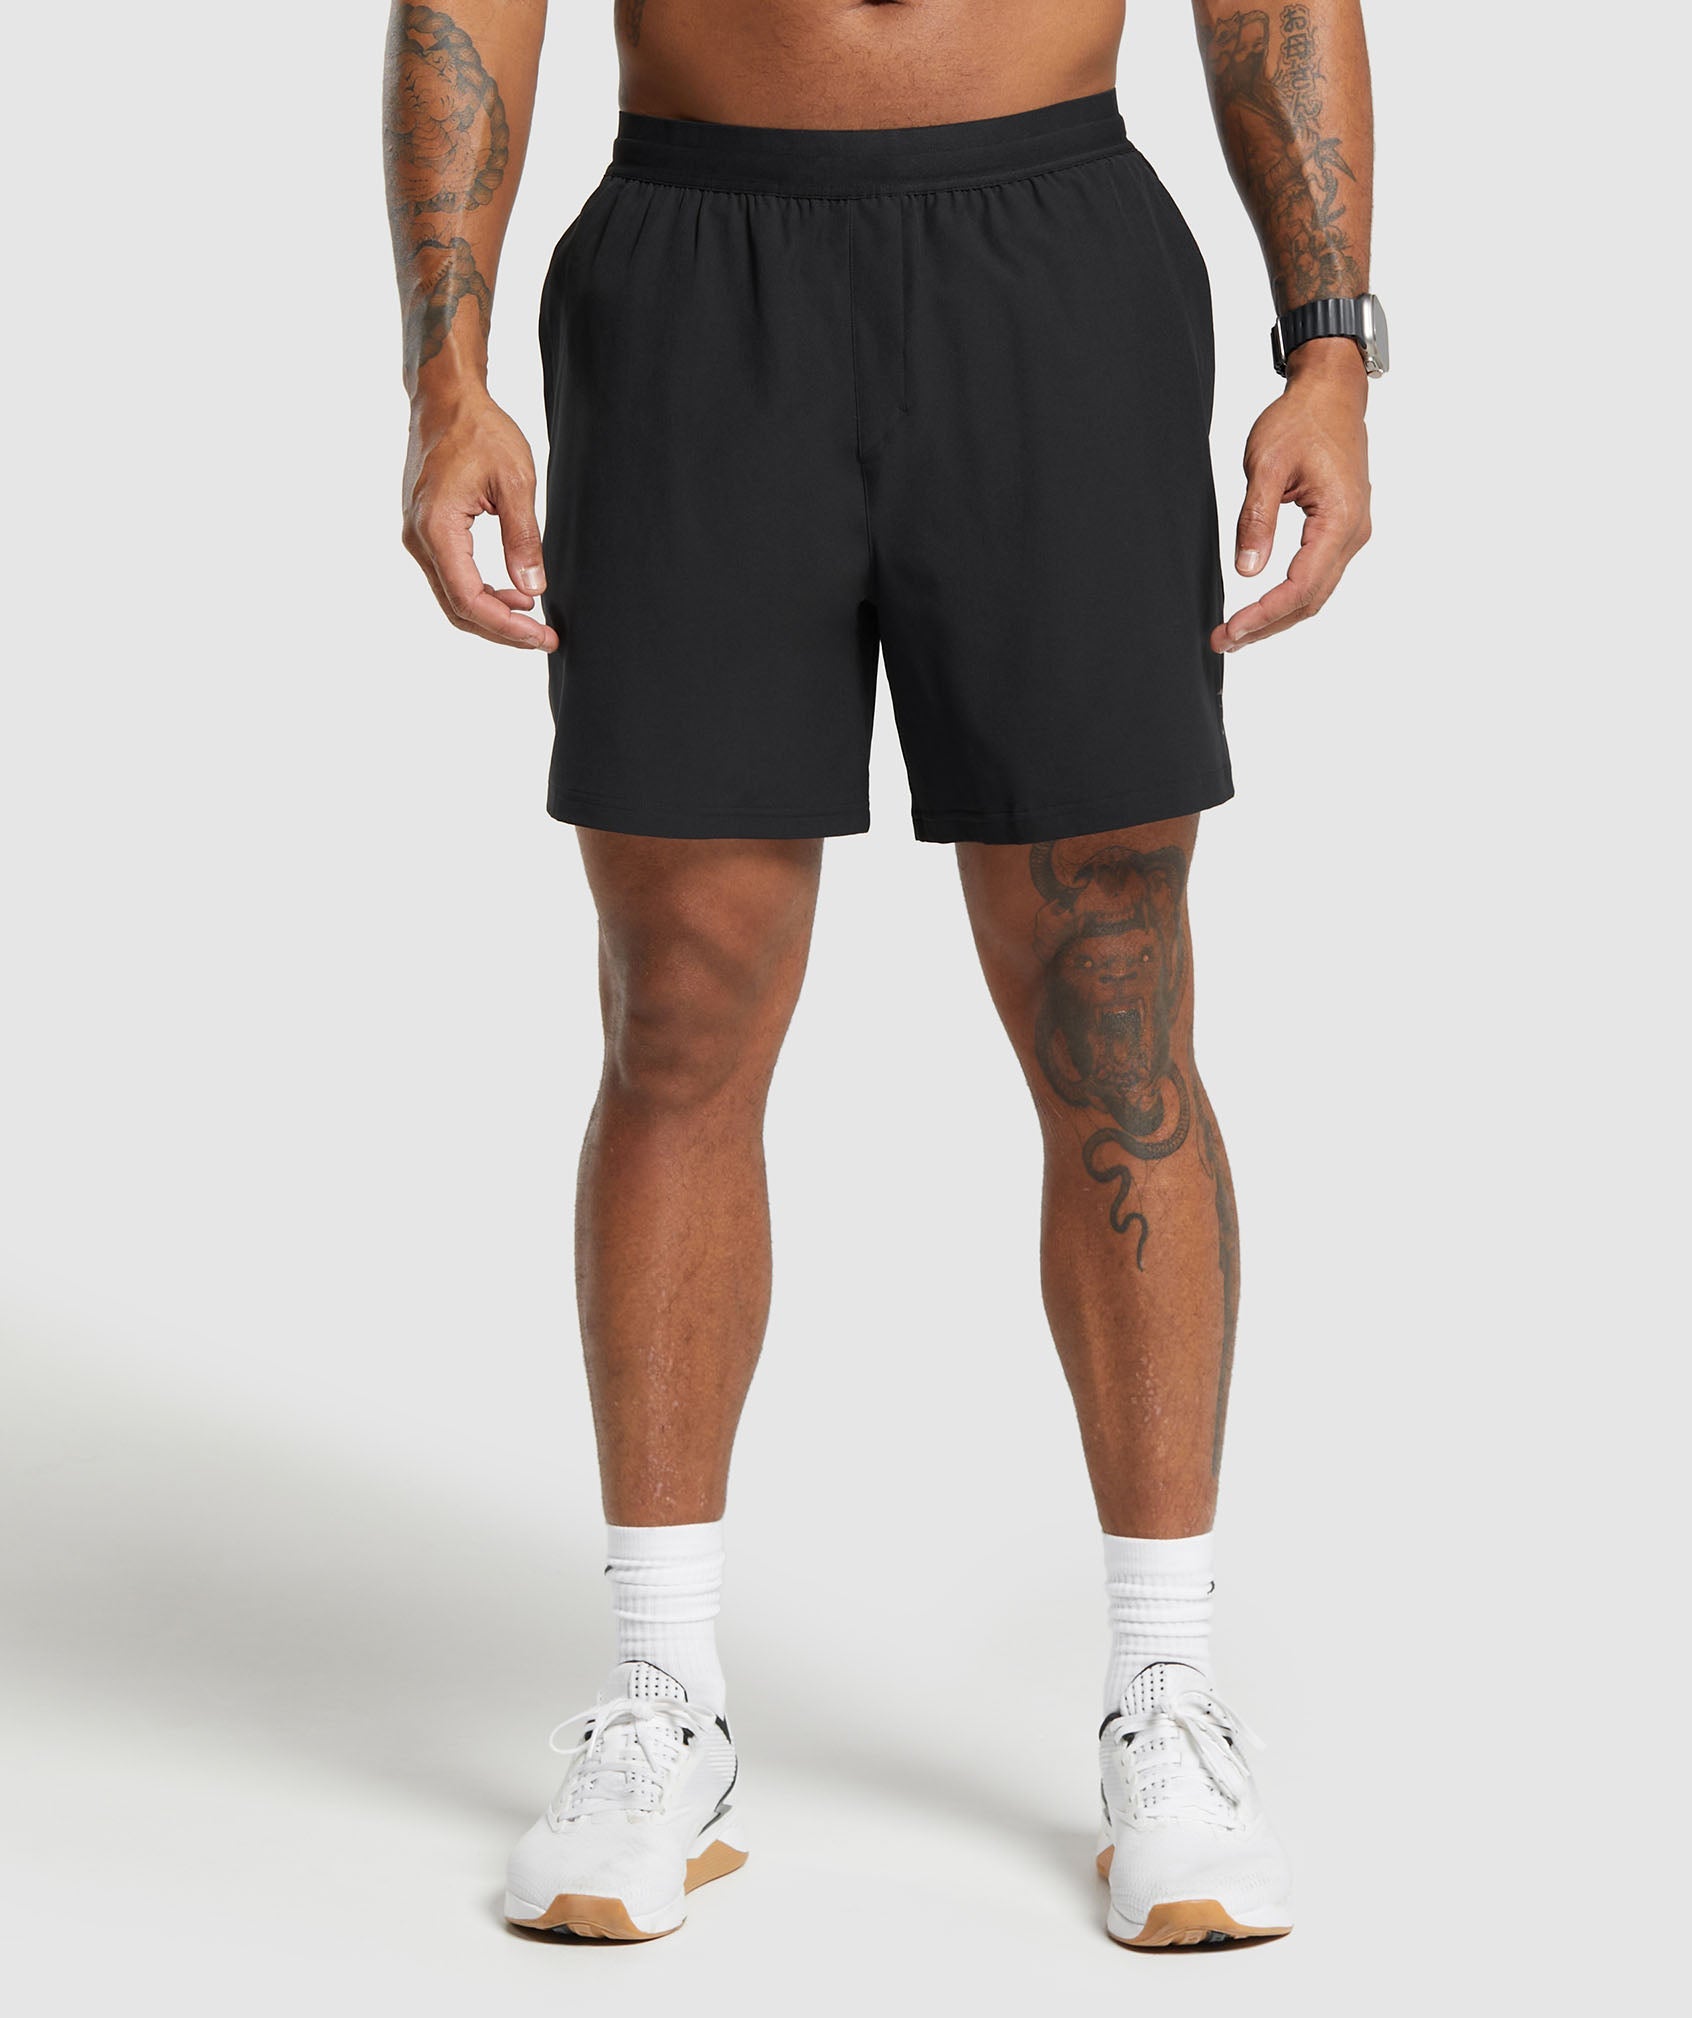 Land to Water 6" Shorts in Black - view 1